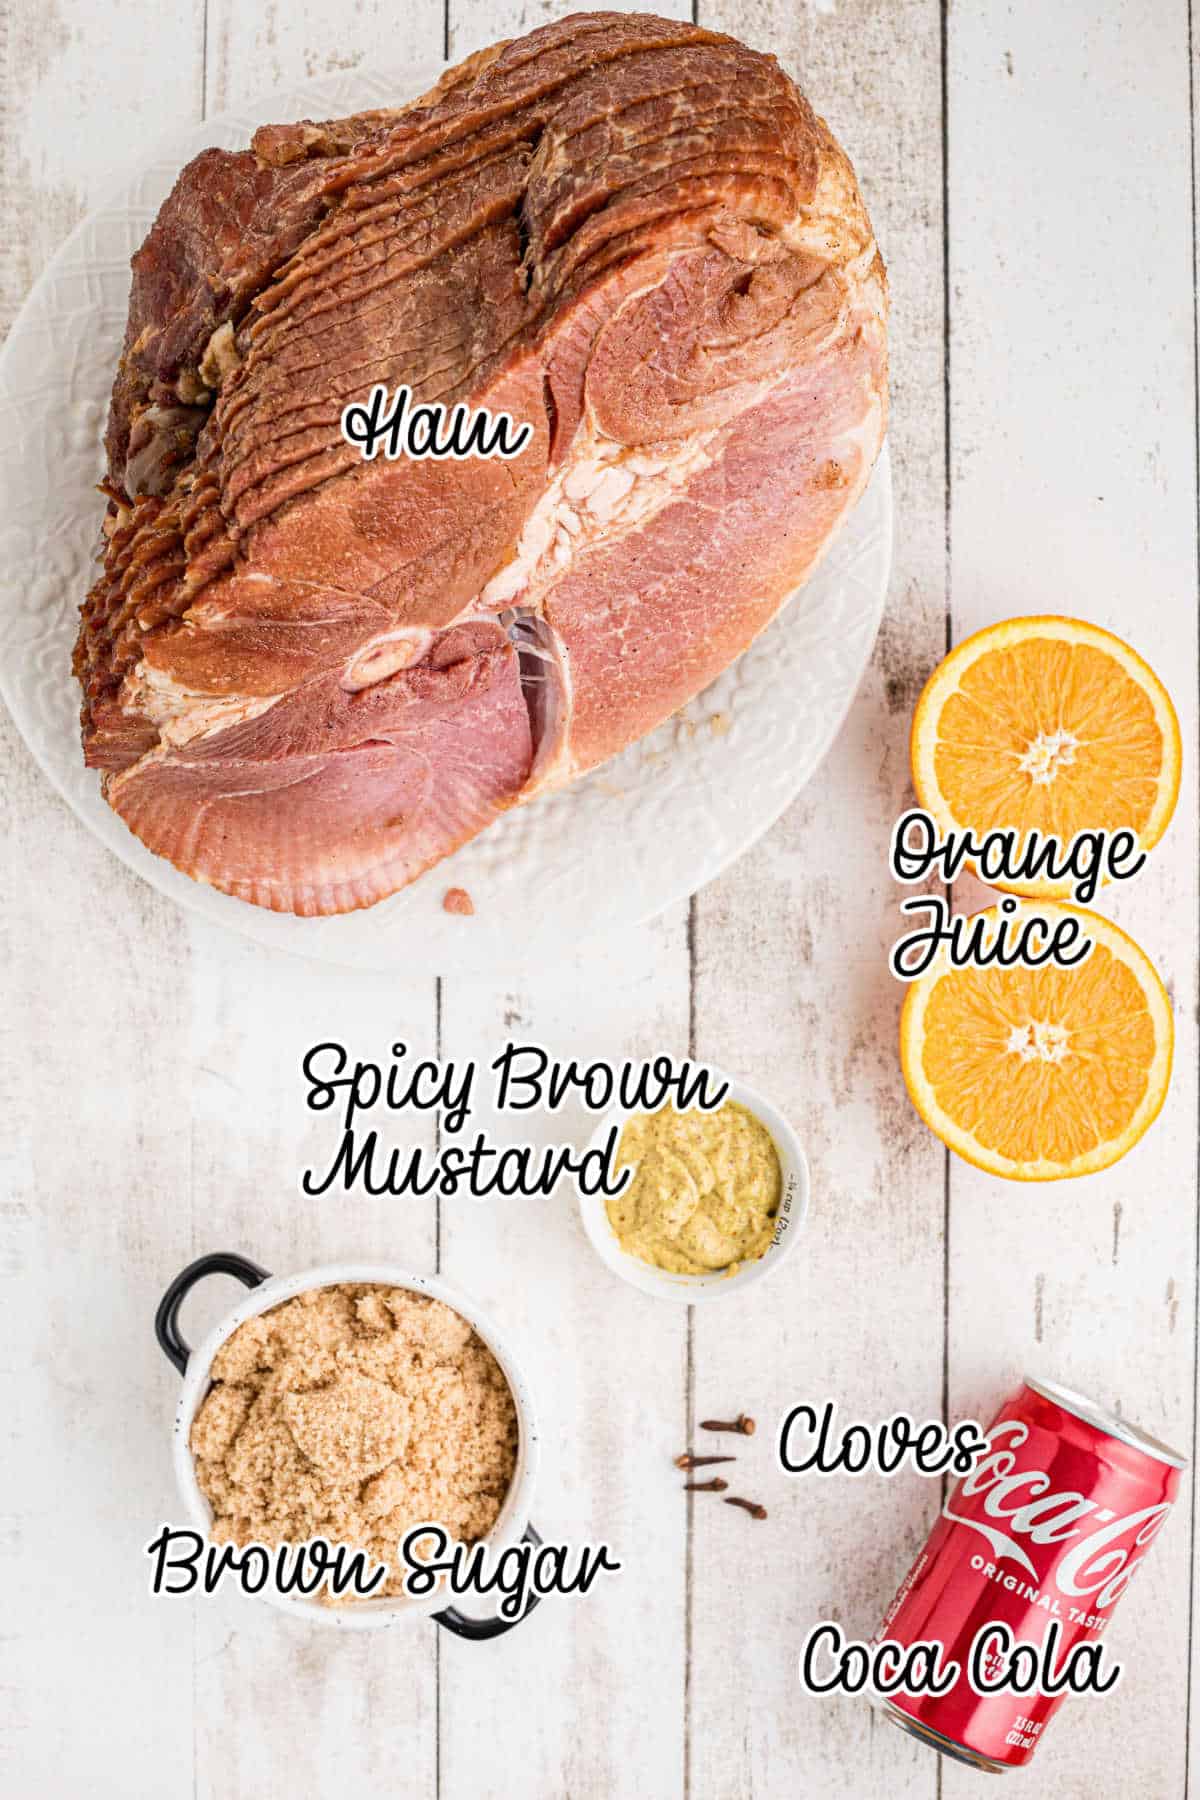 Overhead image of ingredients needed to make a southern coca-cola ham recipe.